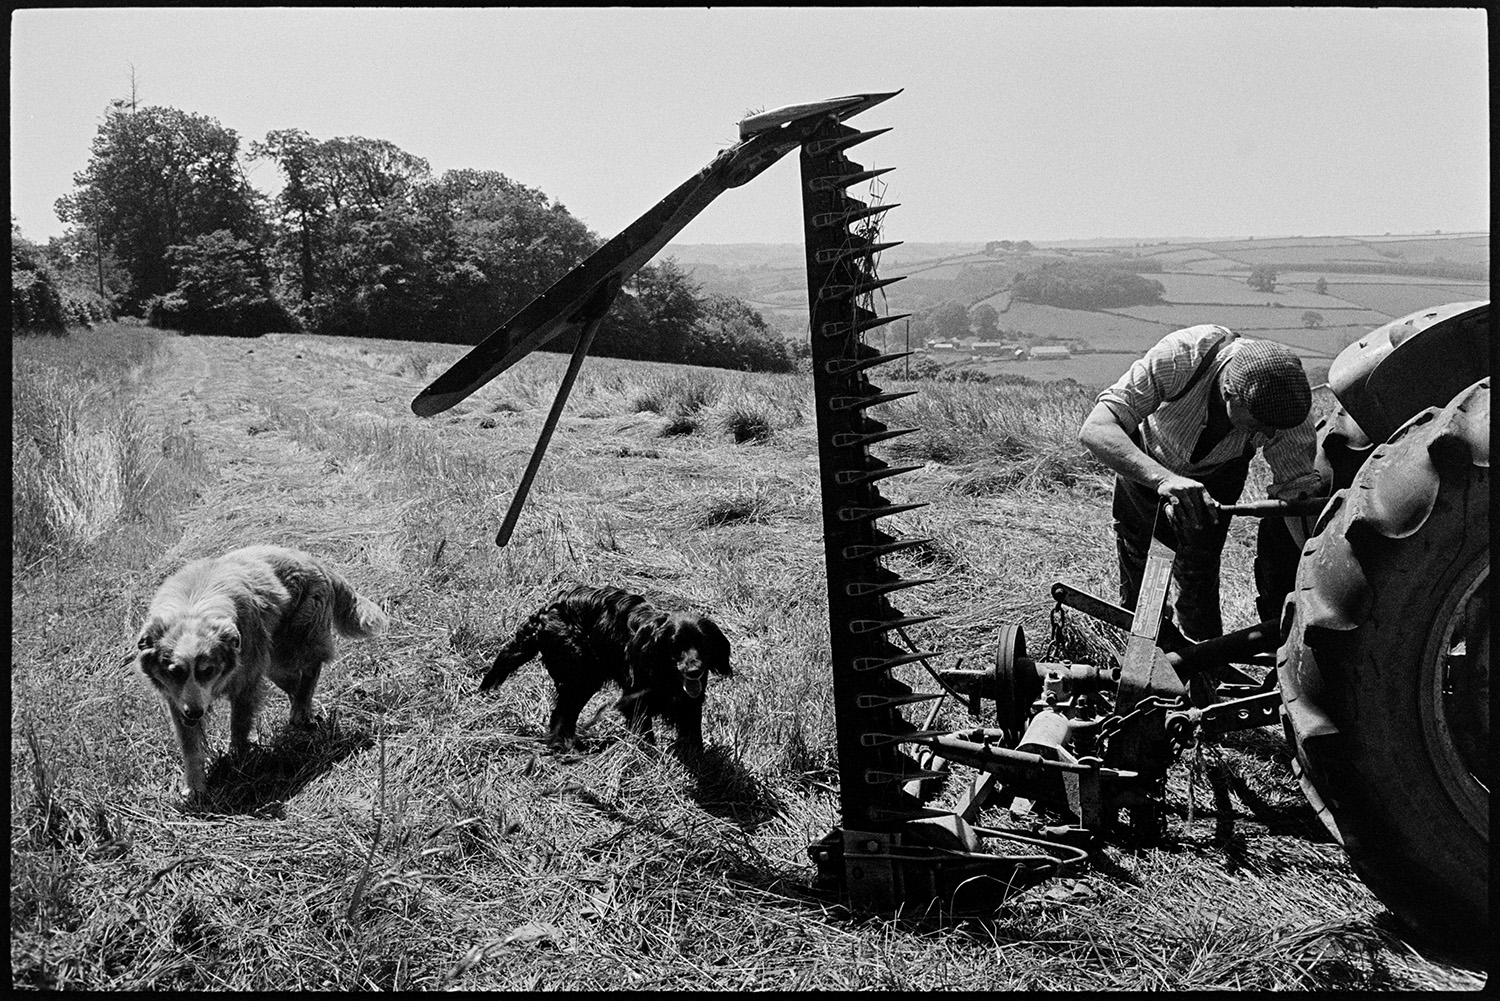 Farmer checking grass cutter or mower, dogs. 
[George Ayre checking a mower attached to a tractor in a field at Ashwell, Dolton. Two dogs are with him.]